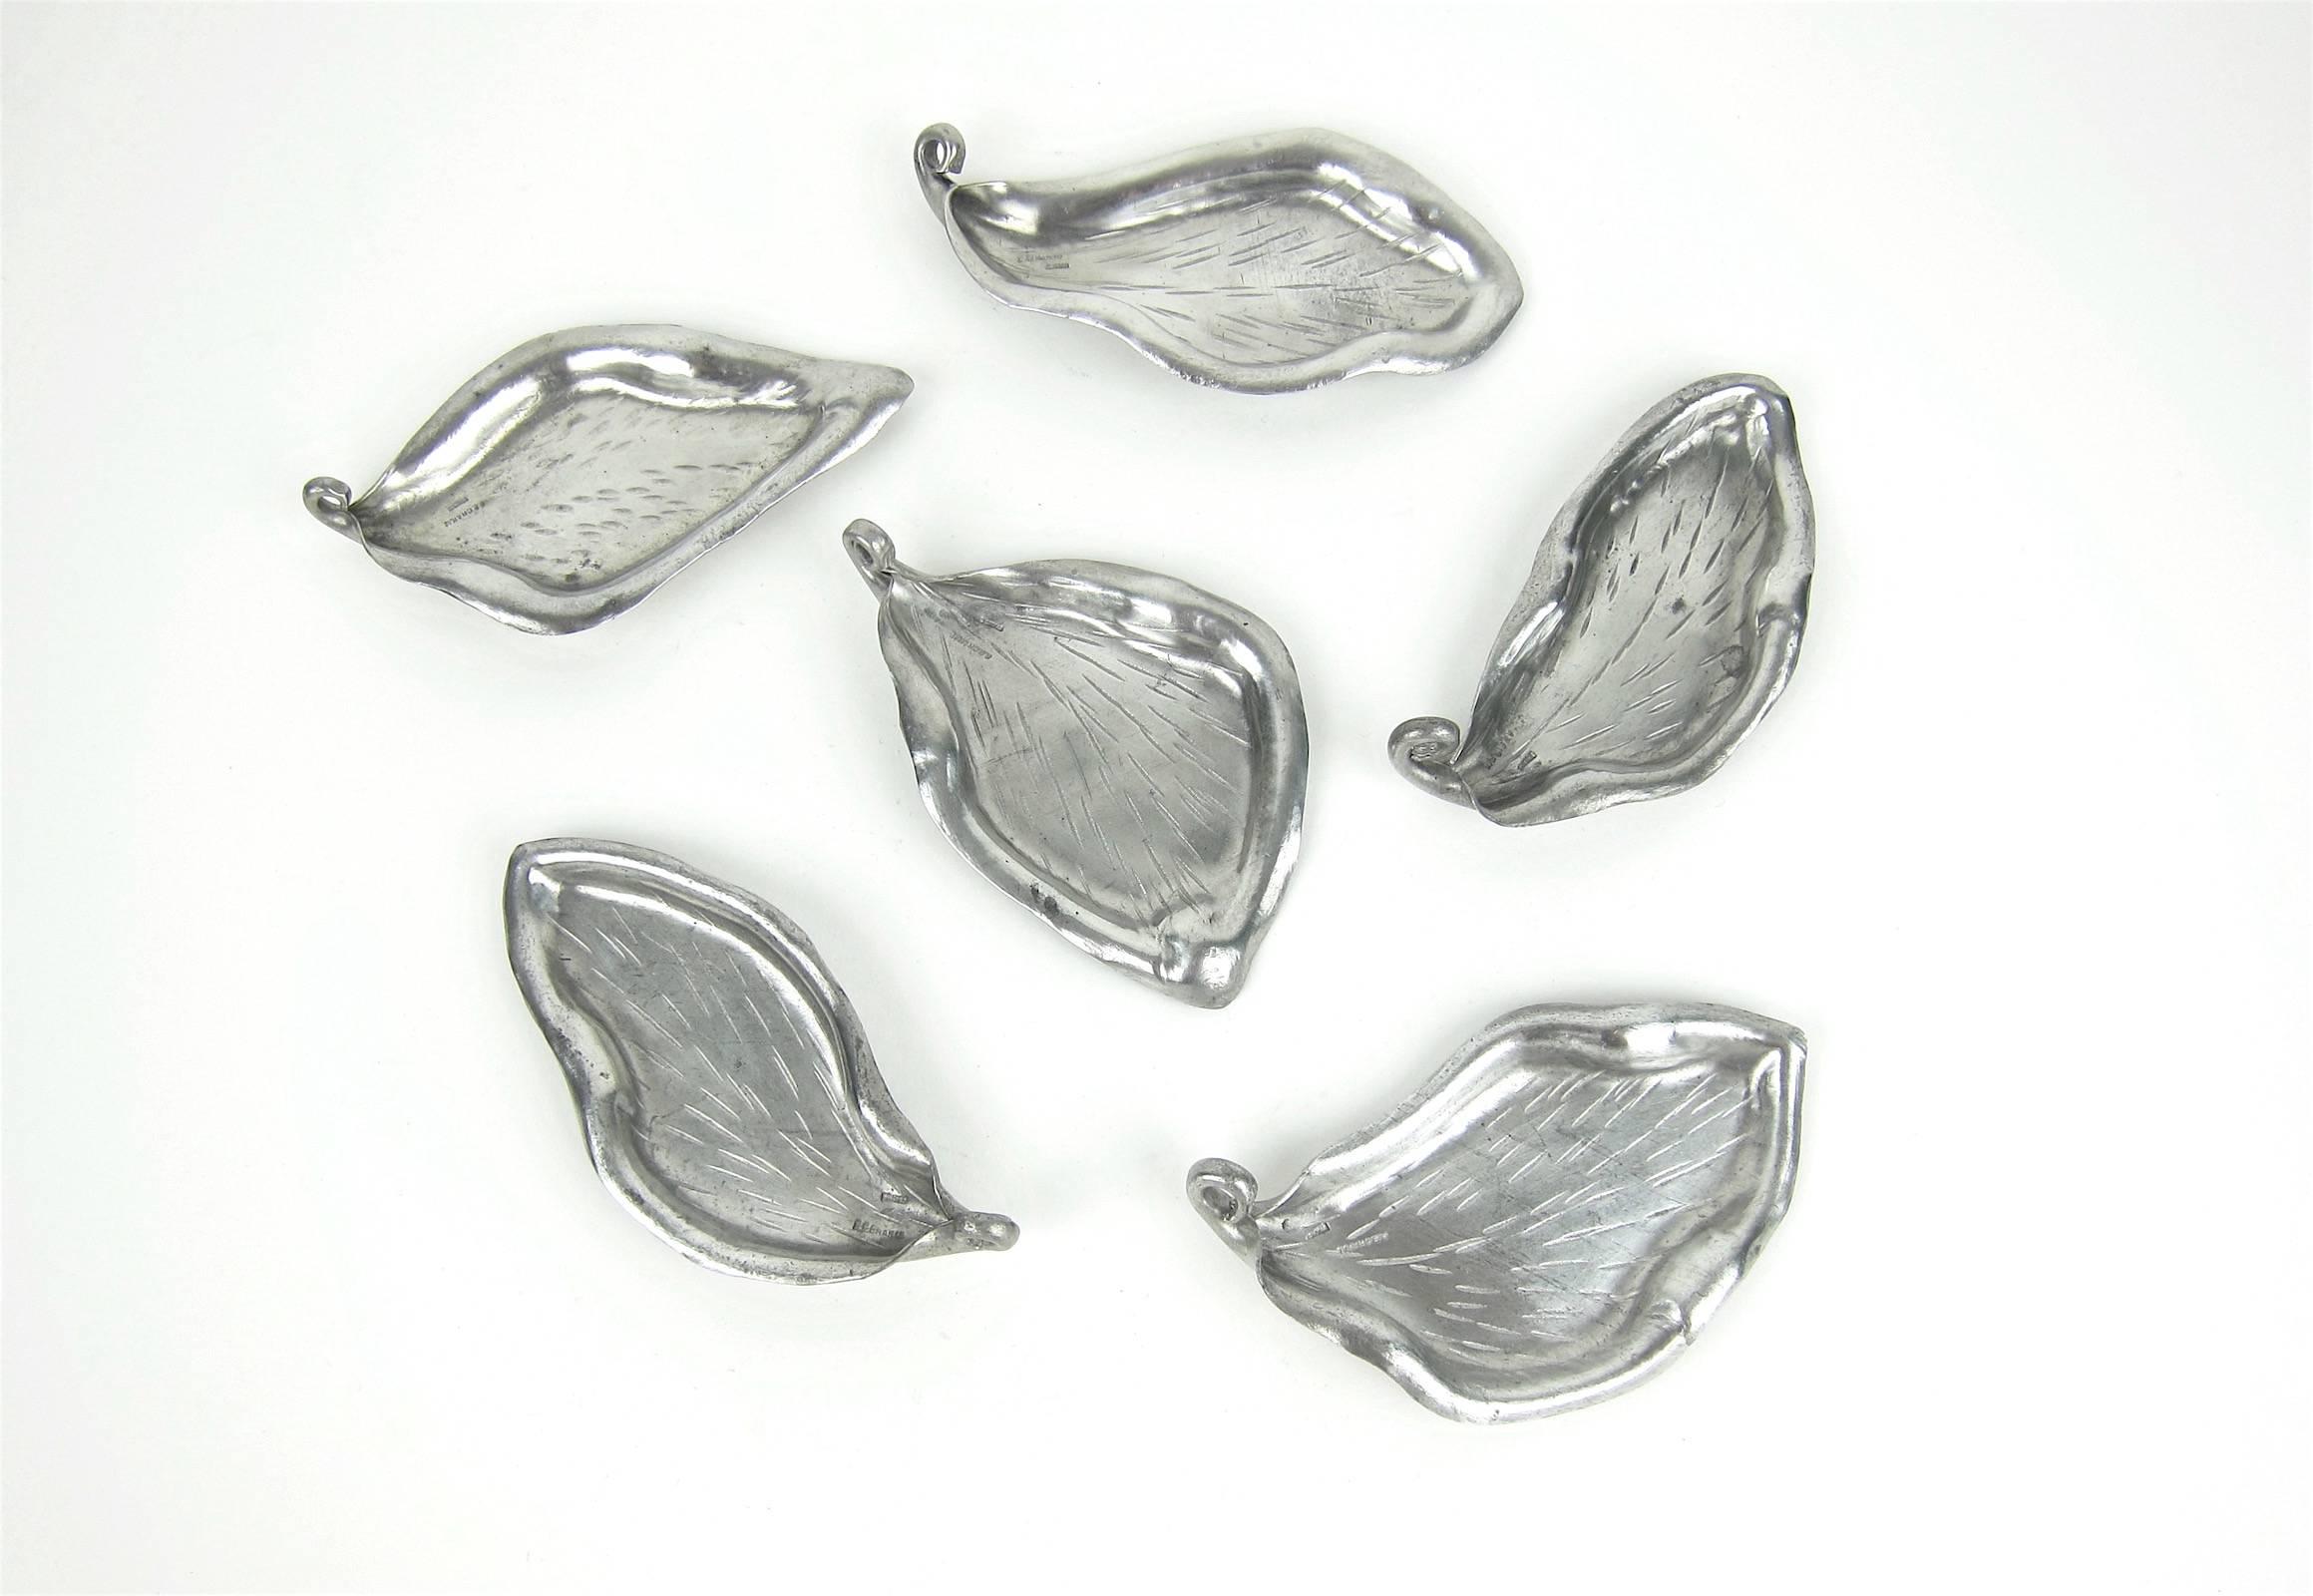 An exquisite set of six French Art Nouveau pewter leaf dishes by renowned Parisian sculptors Alice Chanal (1872-1951) and Eugene Louis Chanal (1872-1925.)

Each hand-crafted leaf exhibits the fluid lines and form typical of the Art Nouveau era with